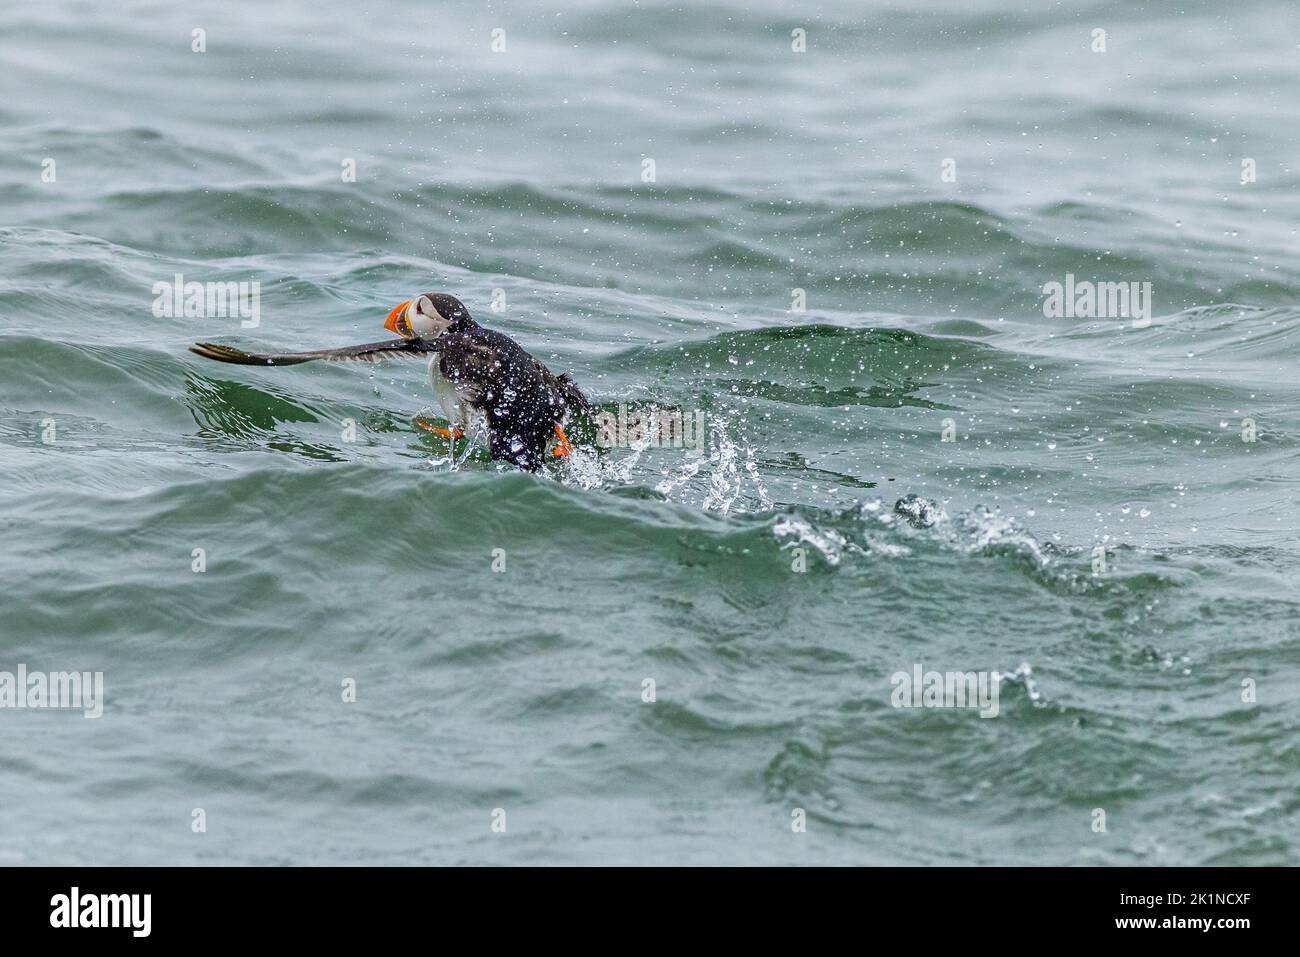 Puffin (Fratercula arctica) running on water Stock Photo